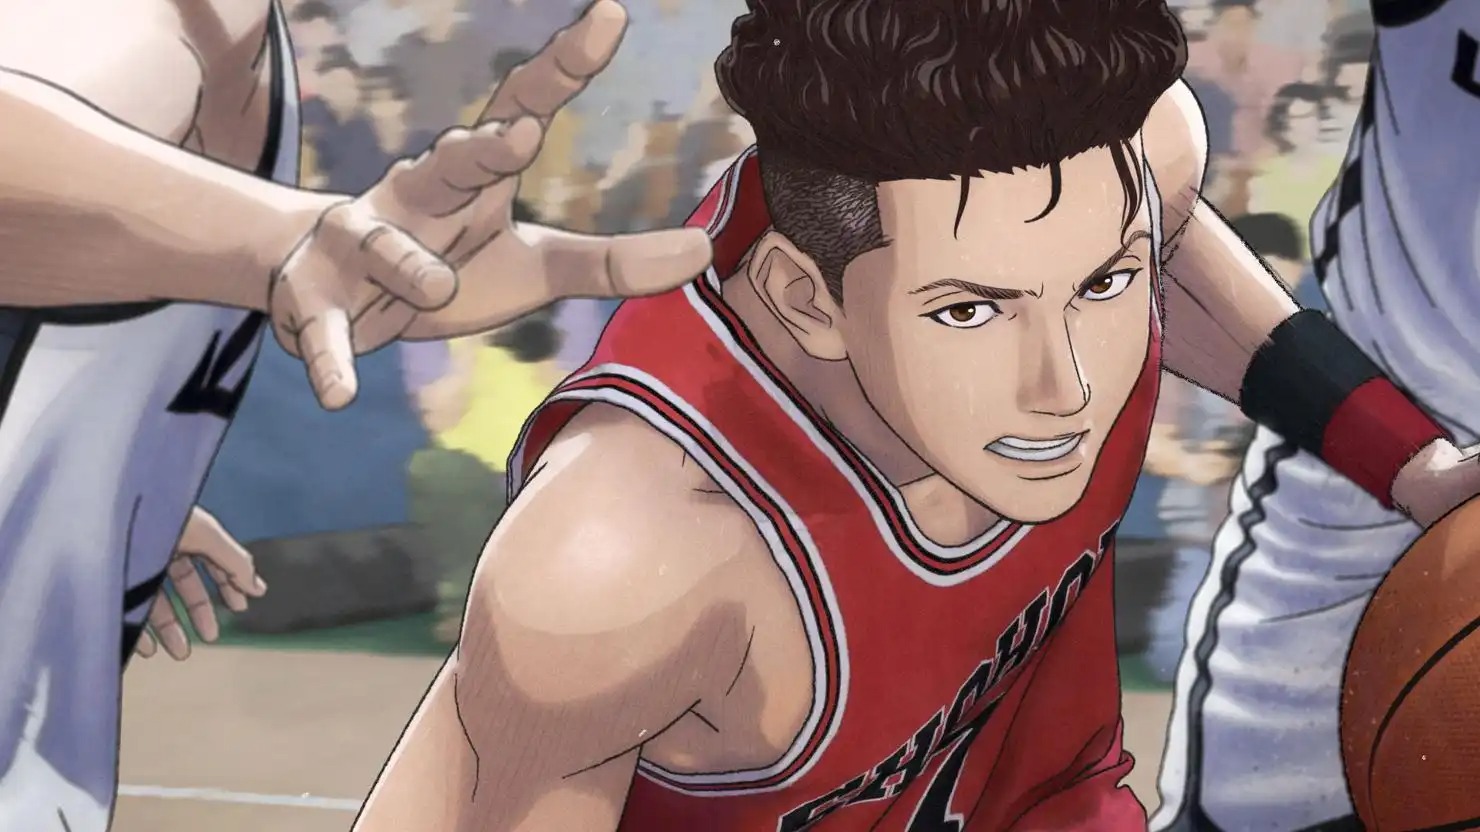 THE FIRST SLAM DUNK’s 1st Three Days in China Nets US Million, Now 10th Highest-Grossing Anime Film Worldwide